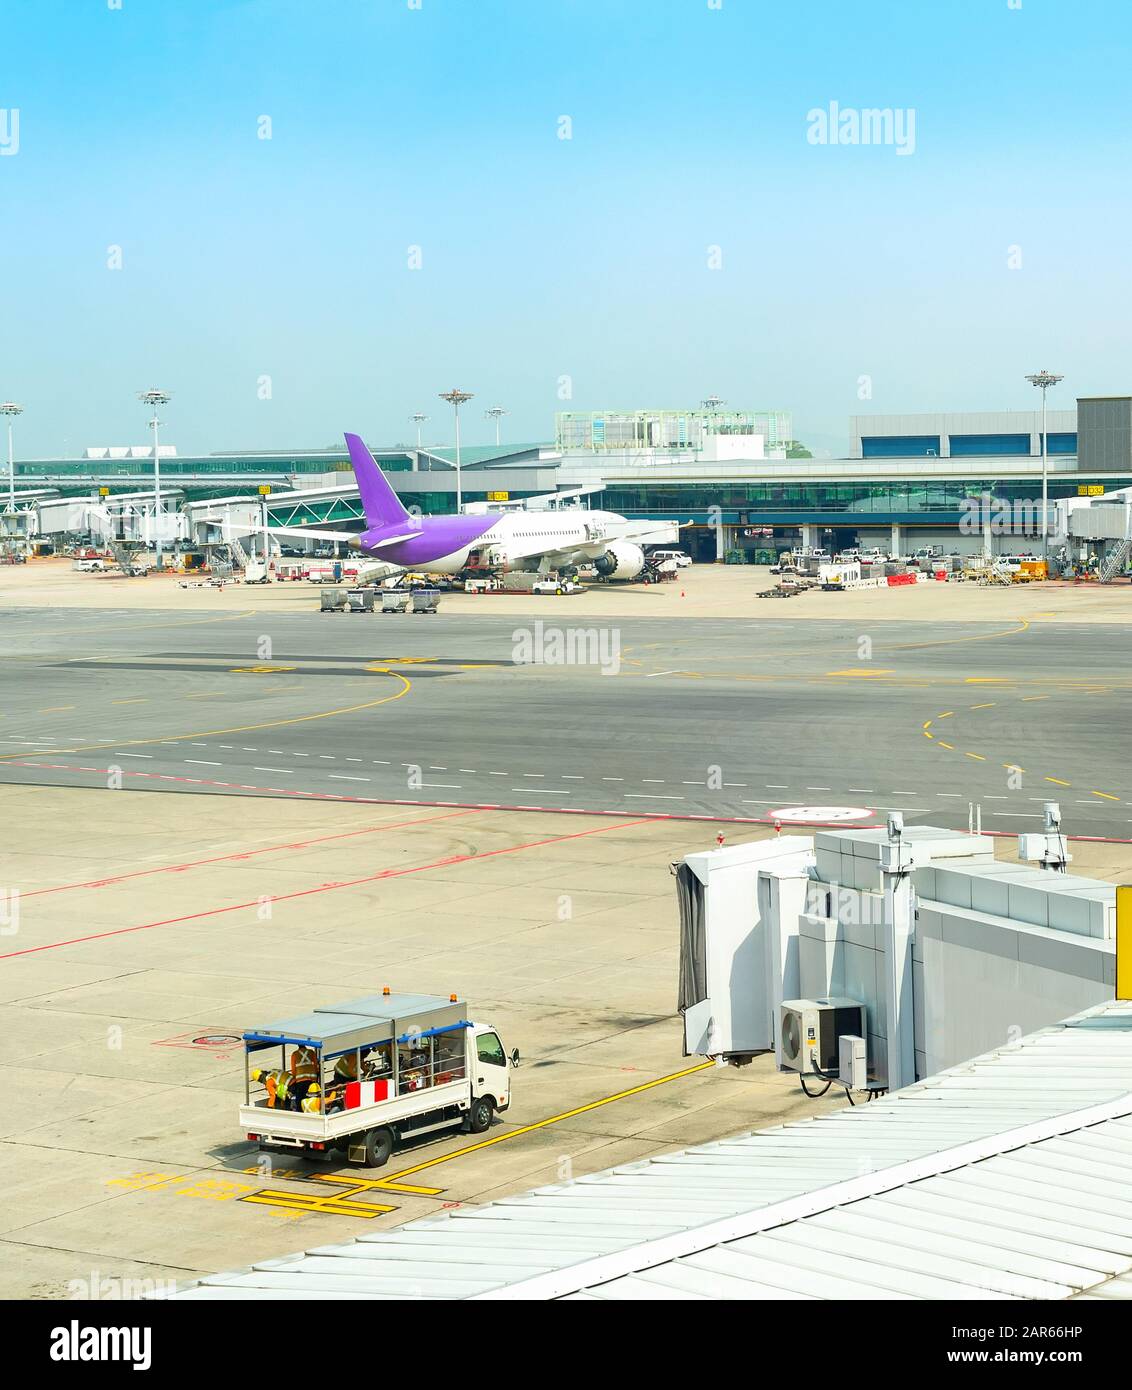 Airfield with planes, service equipment by Changi Airport building, Singapore Stock Photo